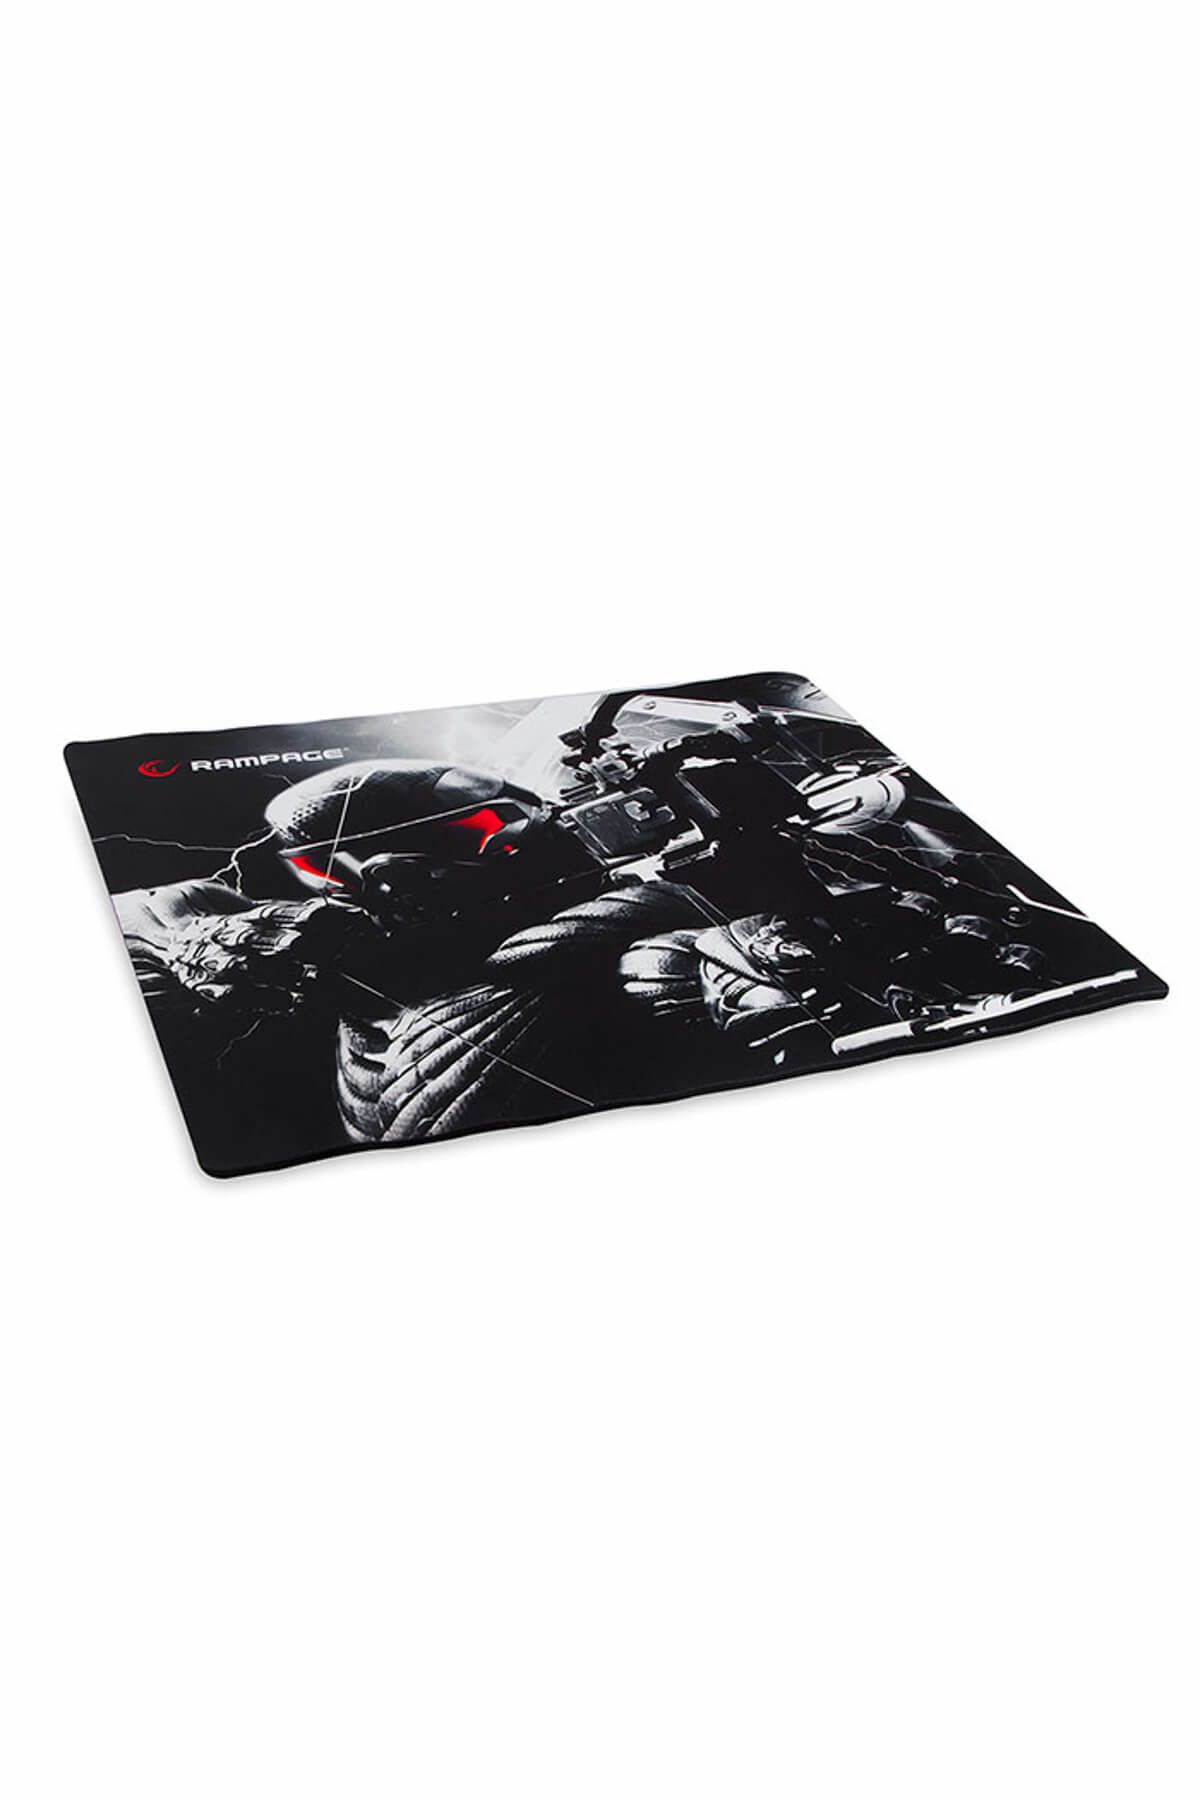 Addison Rampage 450x400x4mm Gaming Mouse Pad